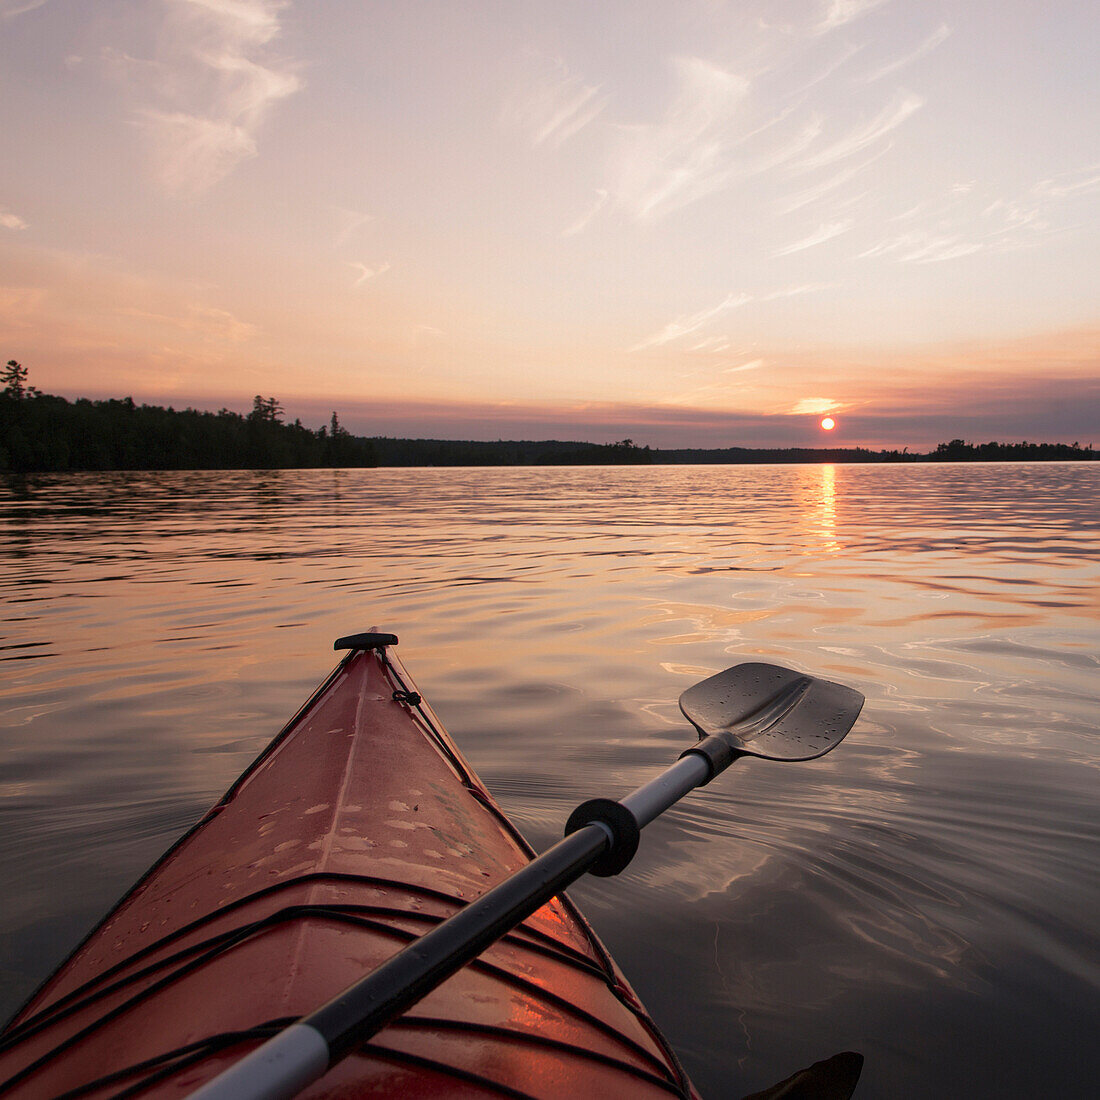 'Bow of a red kayak and paddle on a tranquil lake at sunset;Keewatin ontario canada'